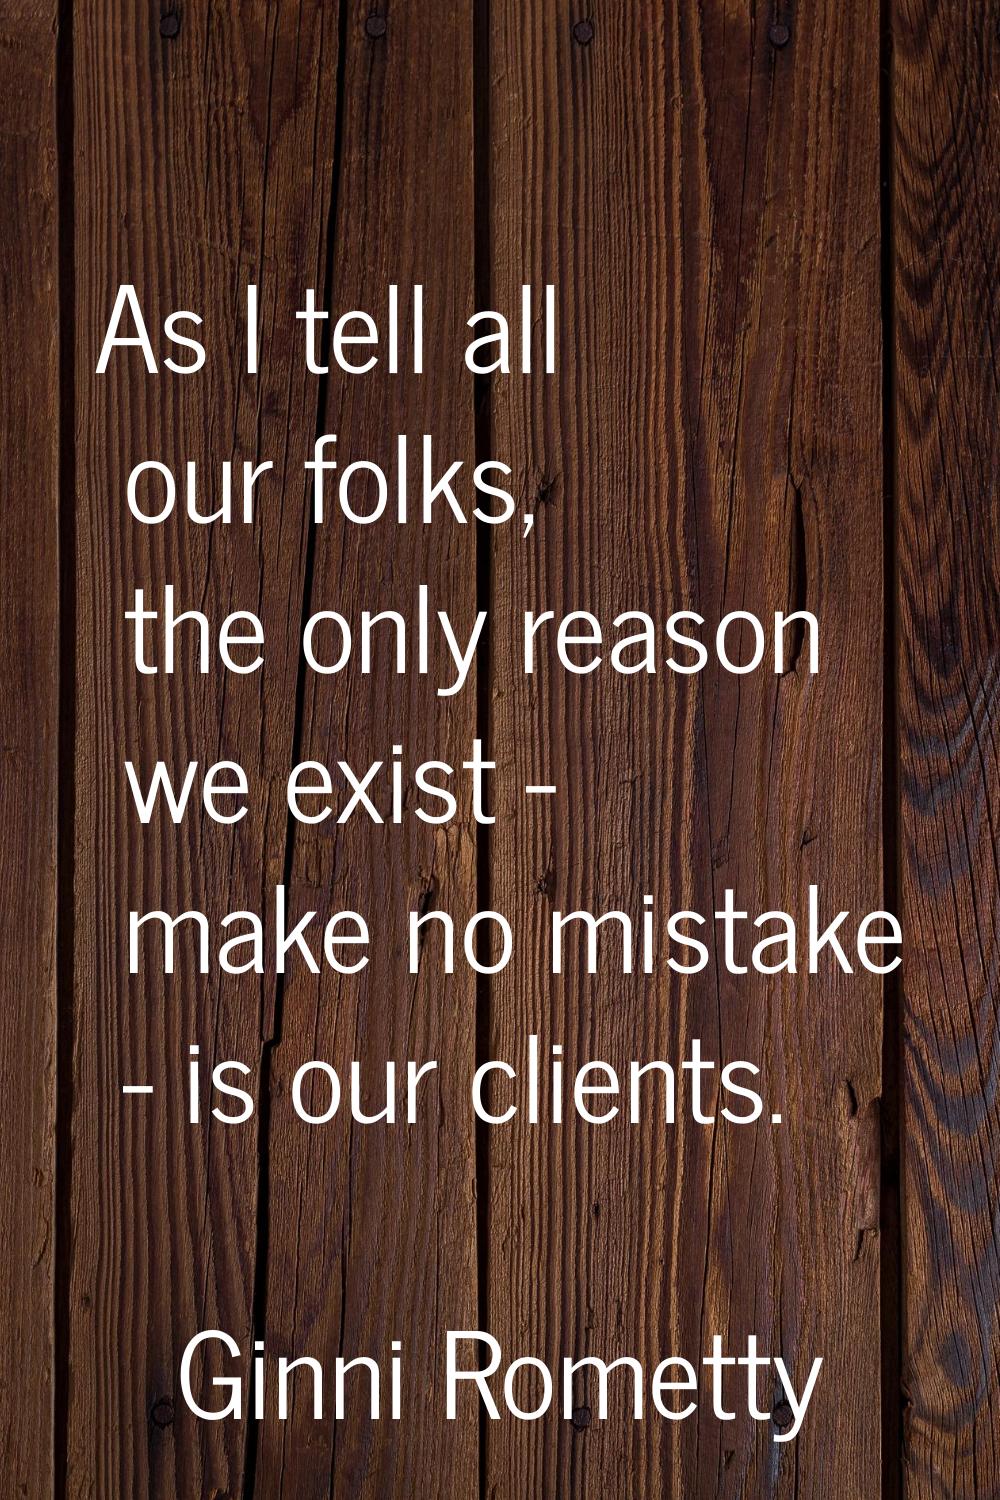 As I tell all our folks, the only reason we exist - make no mistake - is our clients.